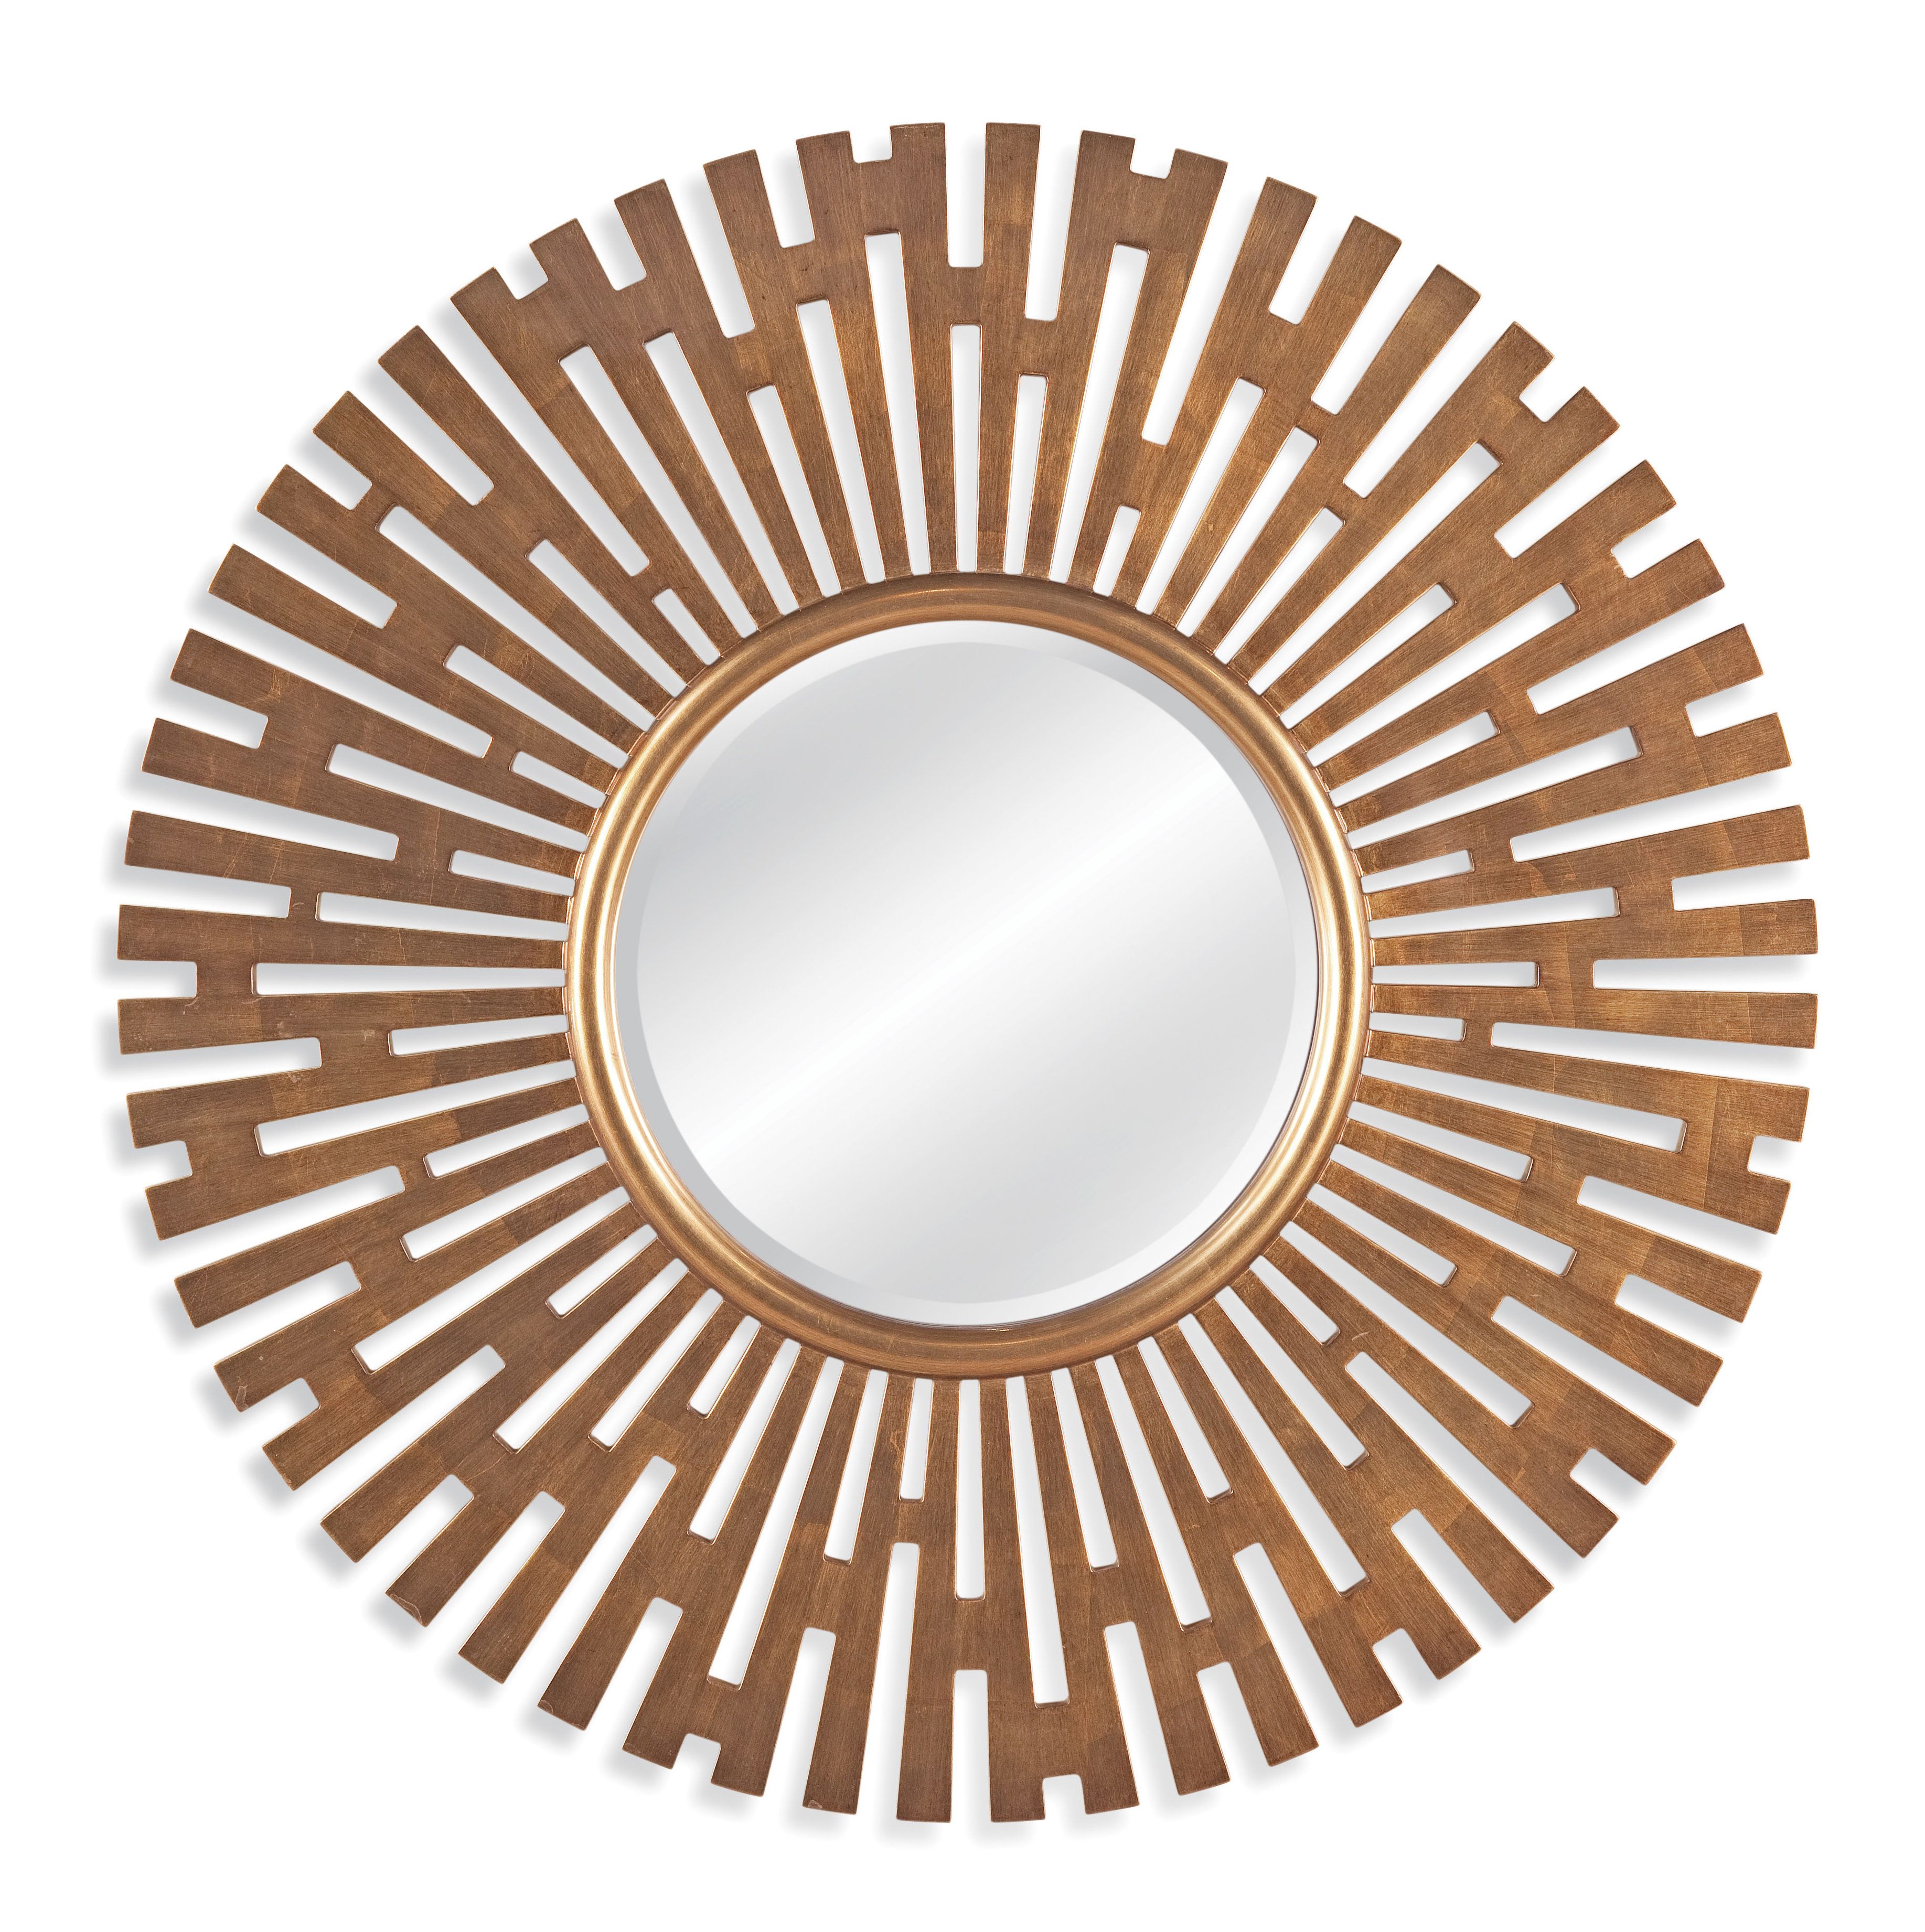 Leaf Wall Mirror | Wayfair With Carstens Sunburst Leaves Wall Mirrors (View 3 of 20)